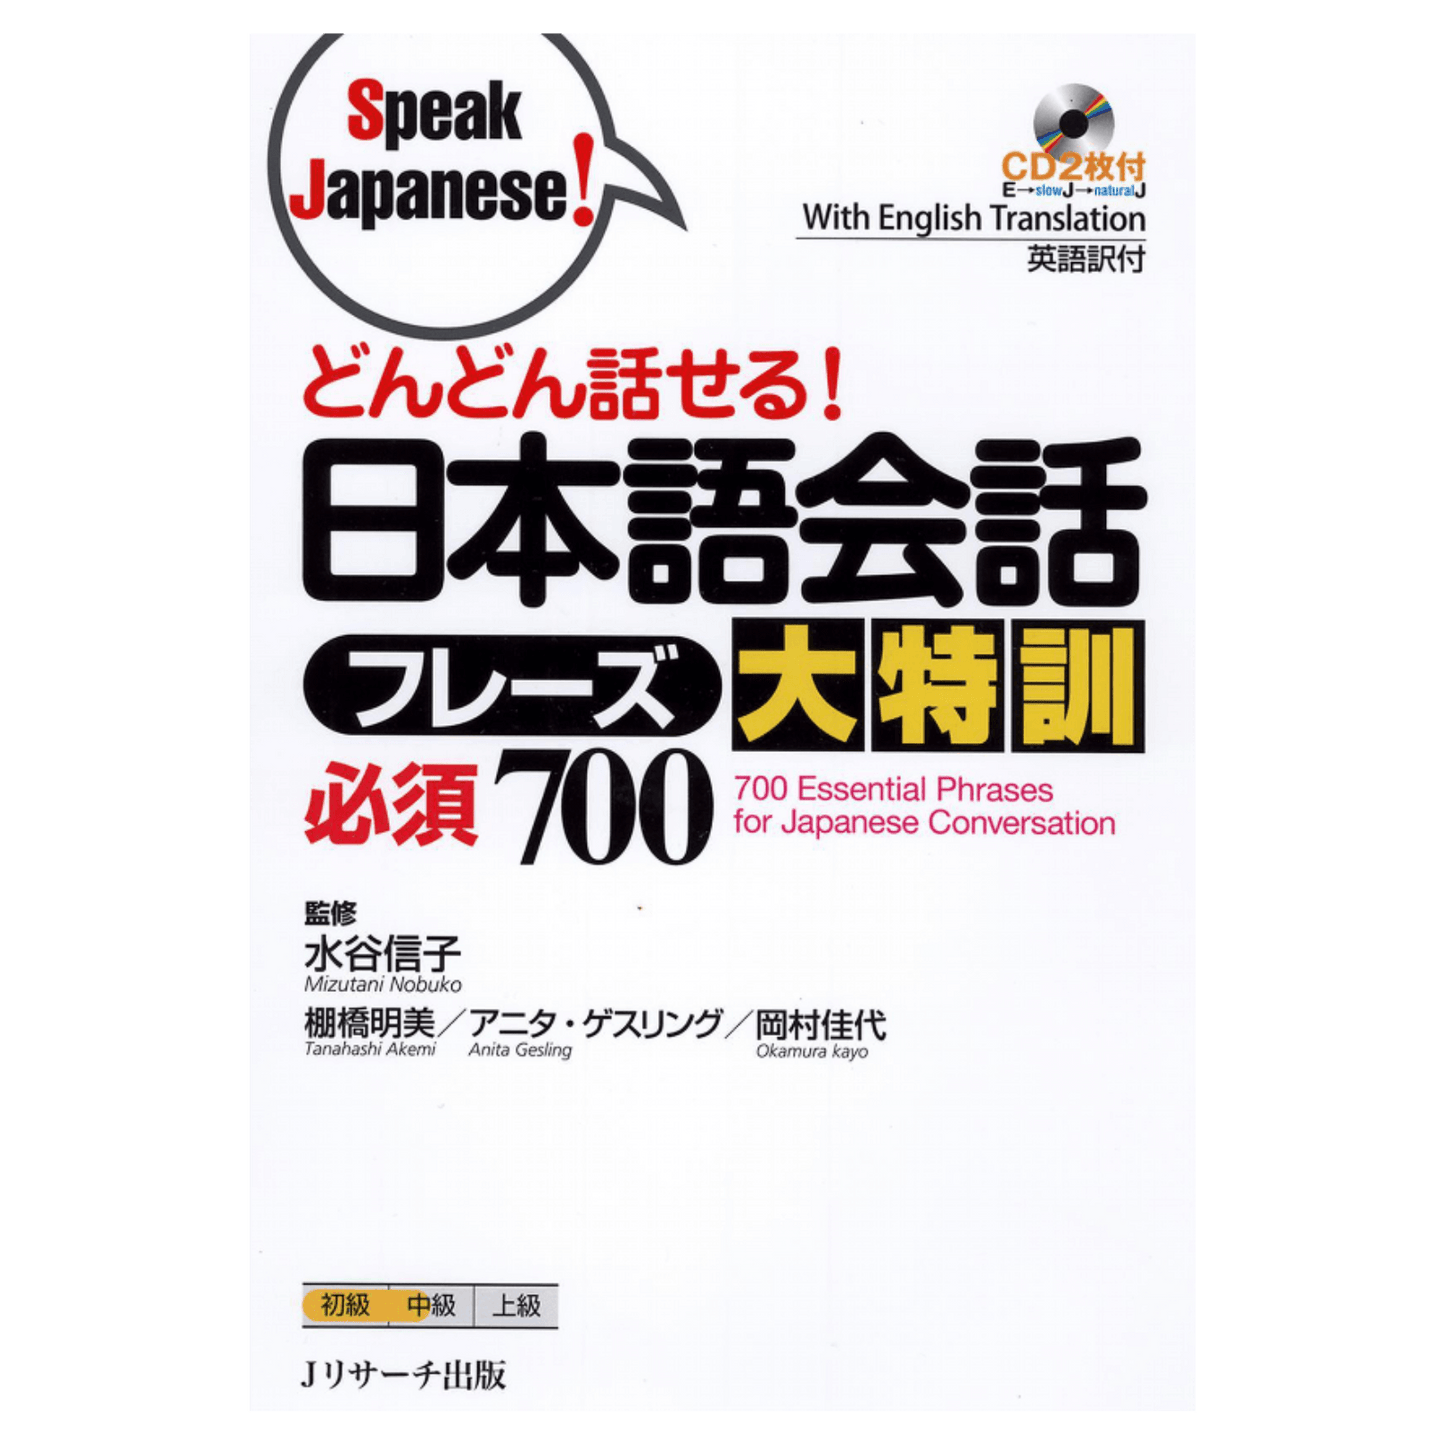 Manuale giapponese | Parla giapponese! -どんどん話せる! ChitoroShop